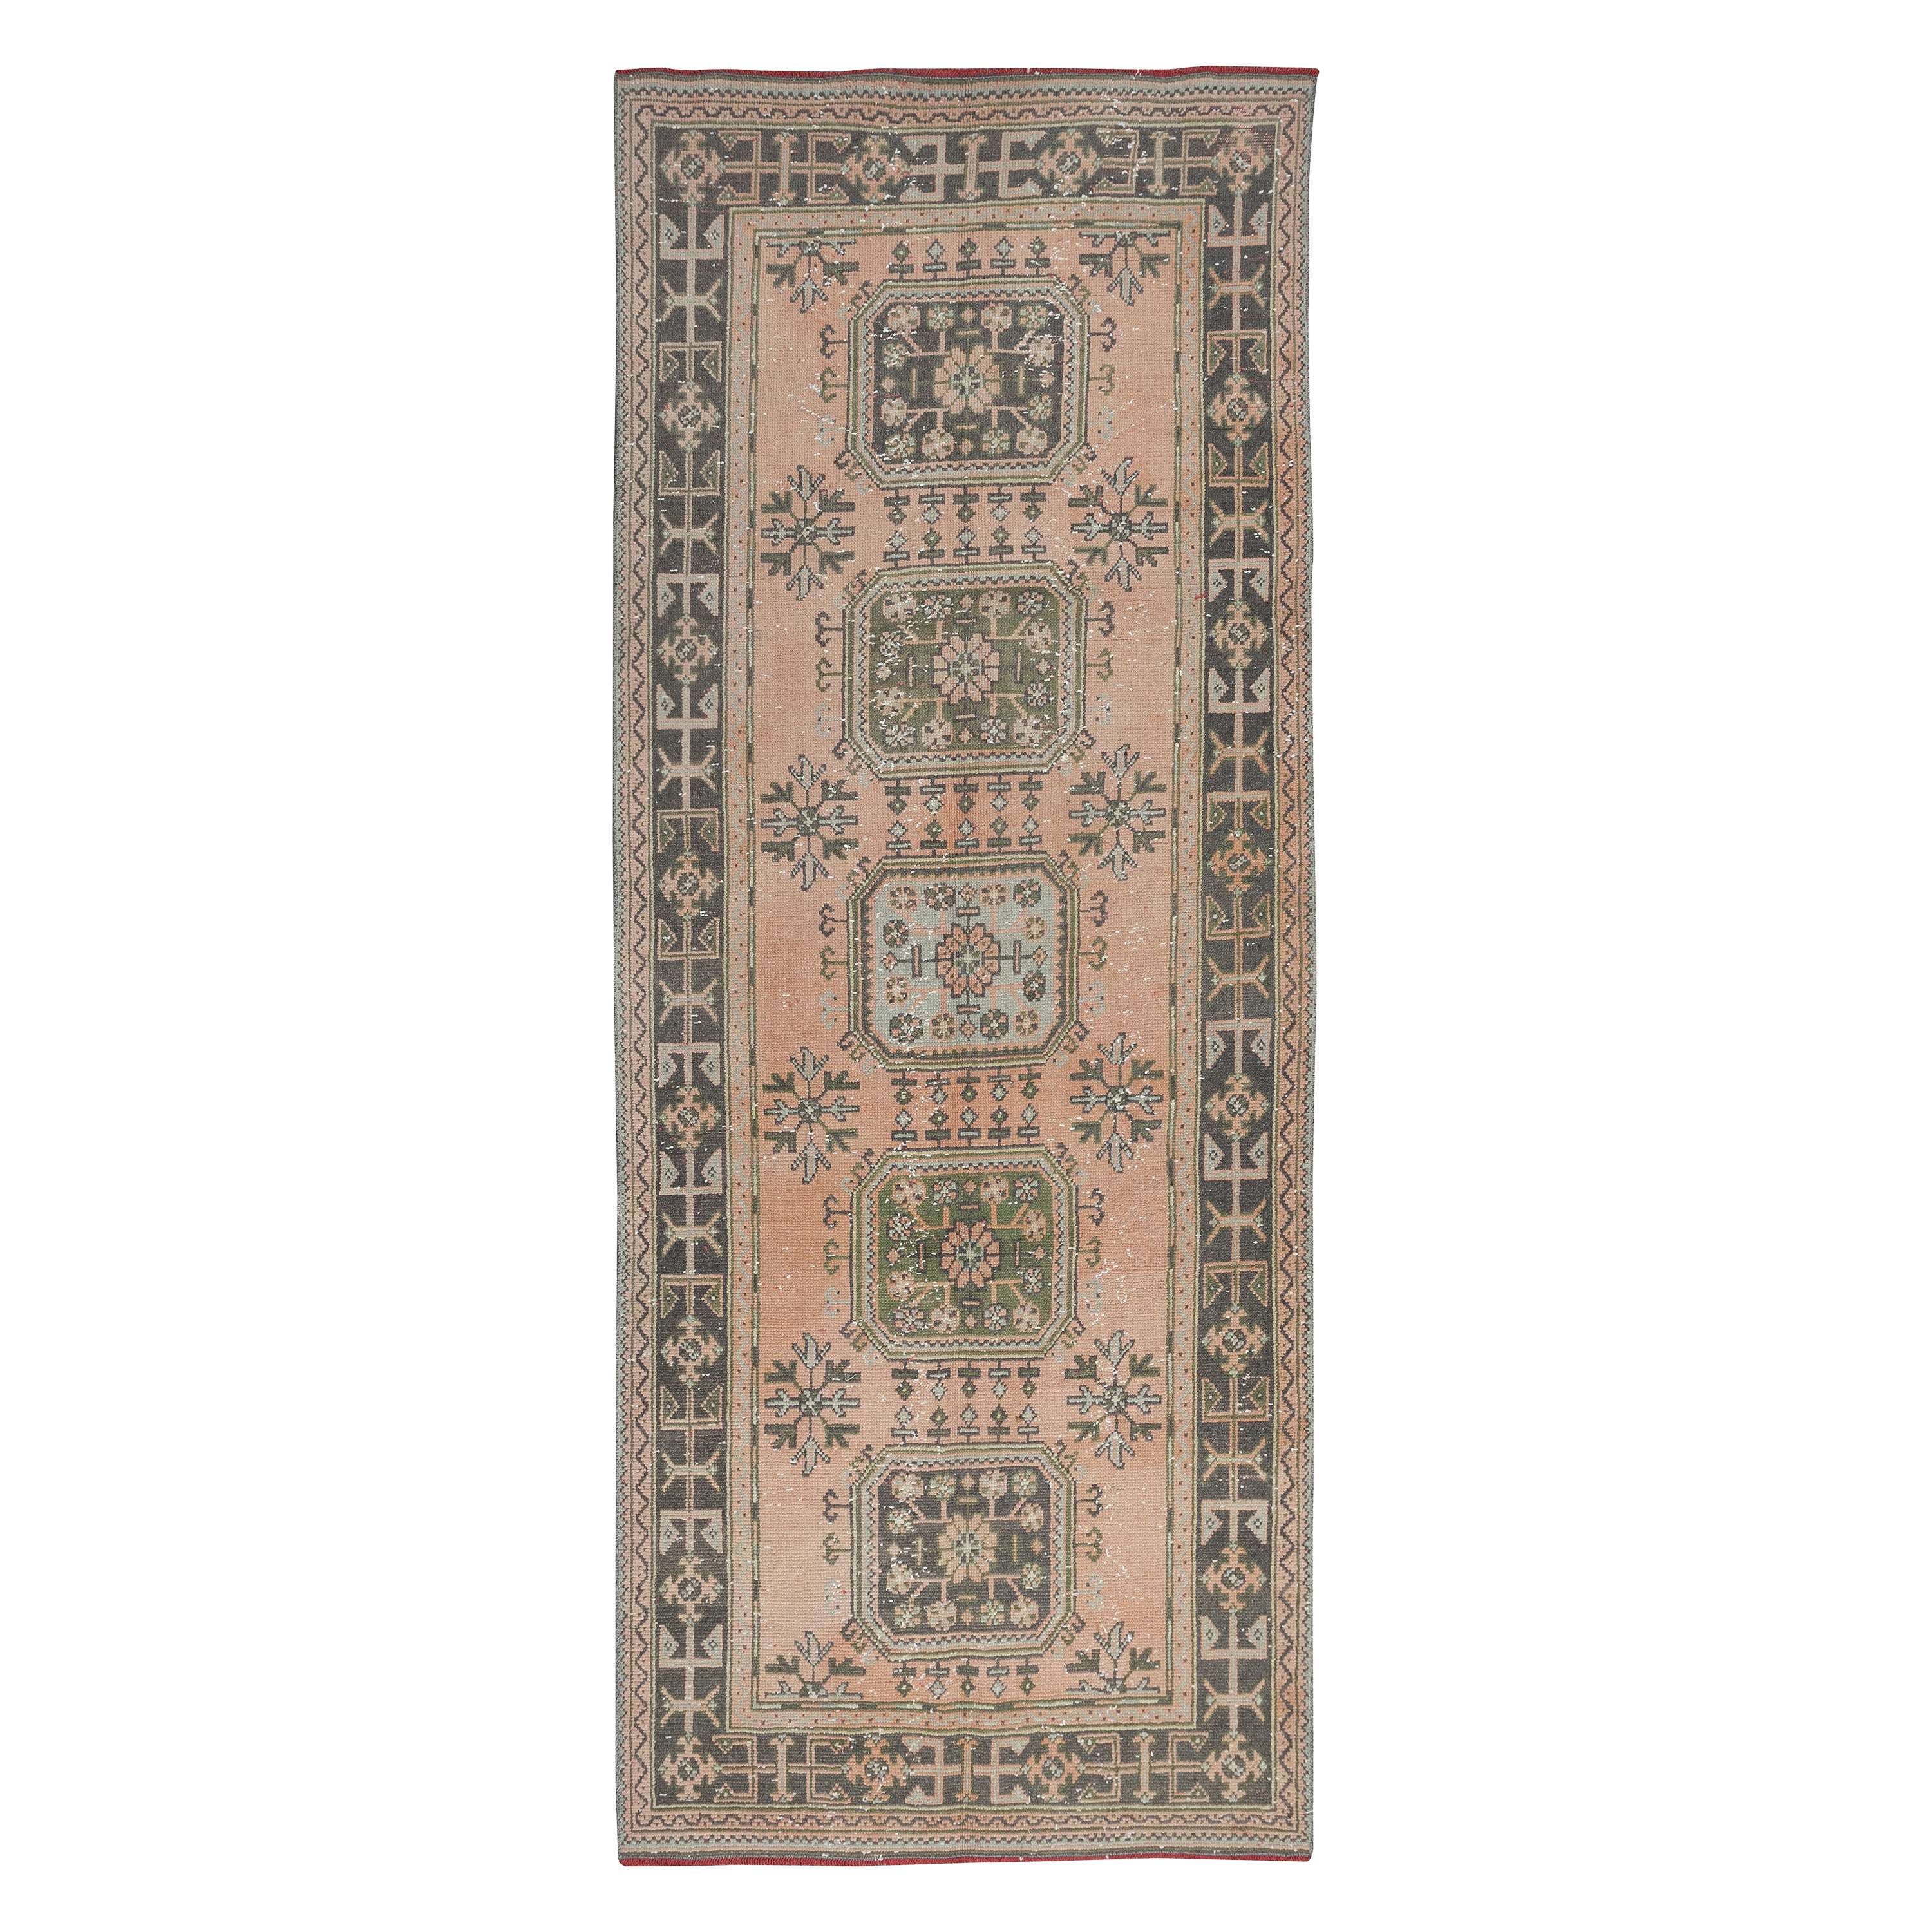 4.5x11 Ft Hand Knotted Runner Rug for Hallway, Vintage Anatolian Corridor Carpet